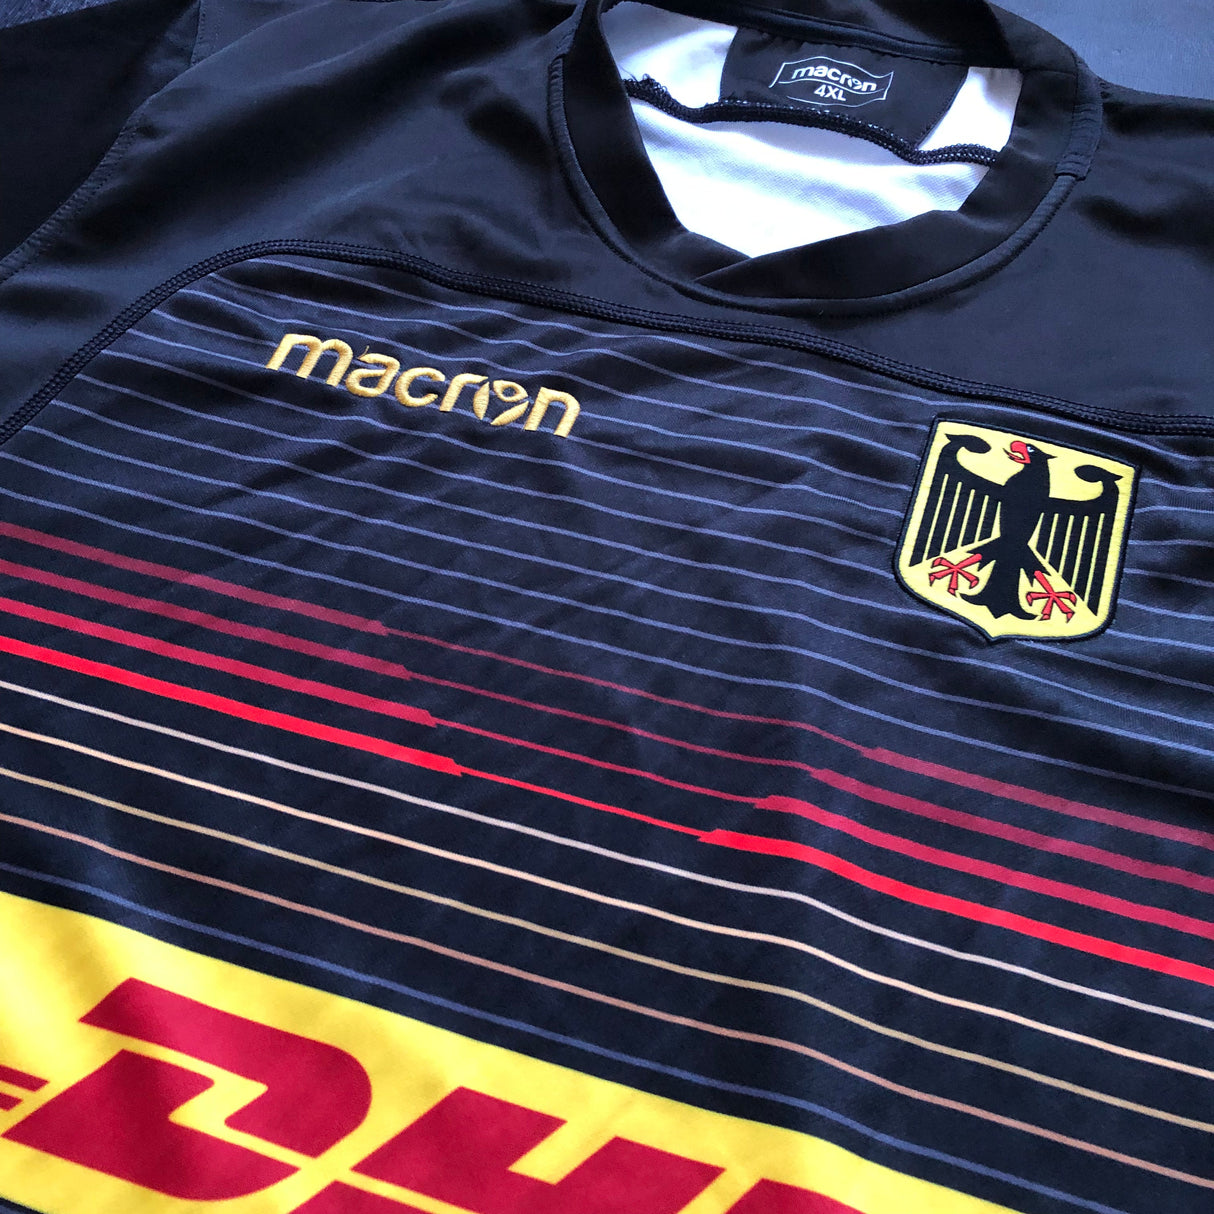 Germany National Rugby Team Jersey 2018/19 4XL Underdog Rugby - The Tier 2 Rugby Shop 